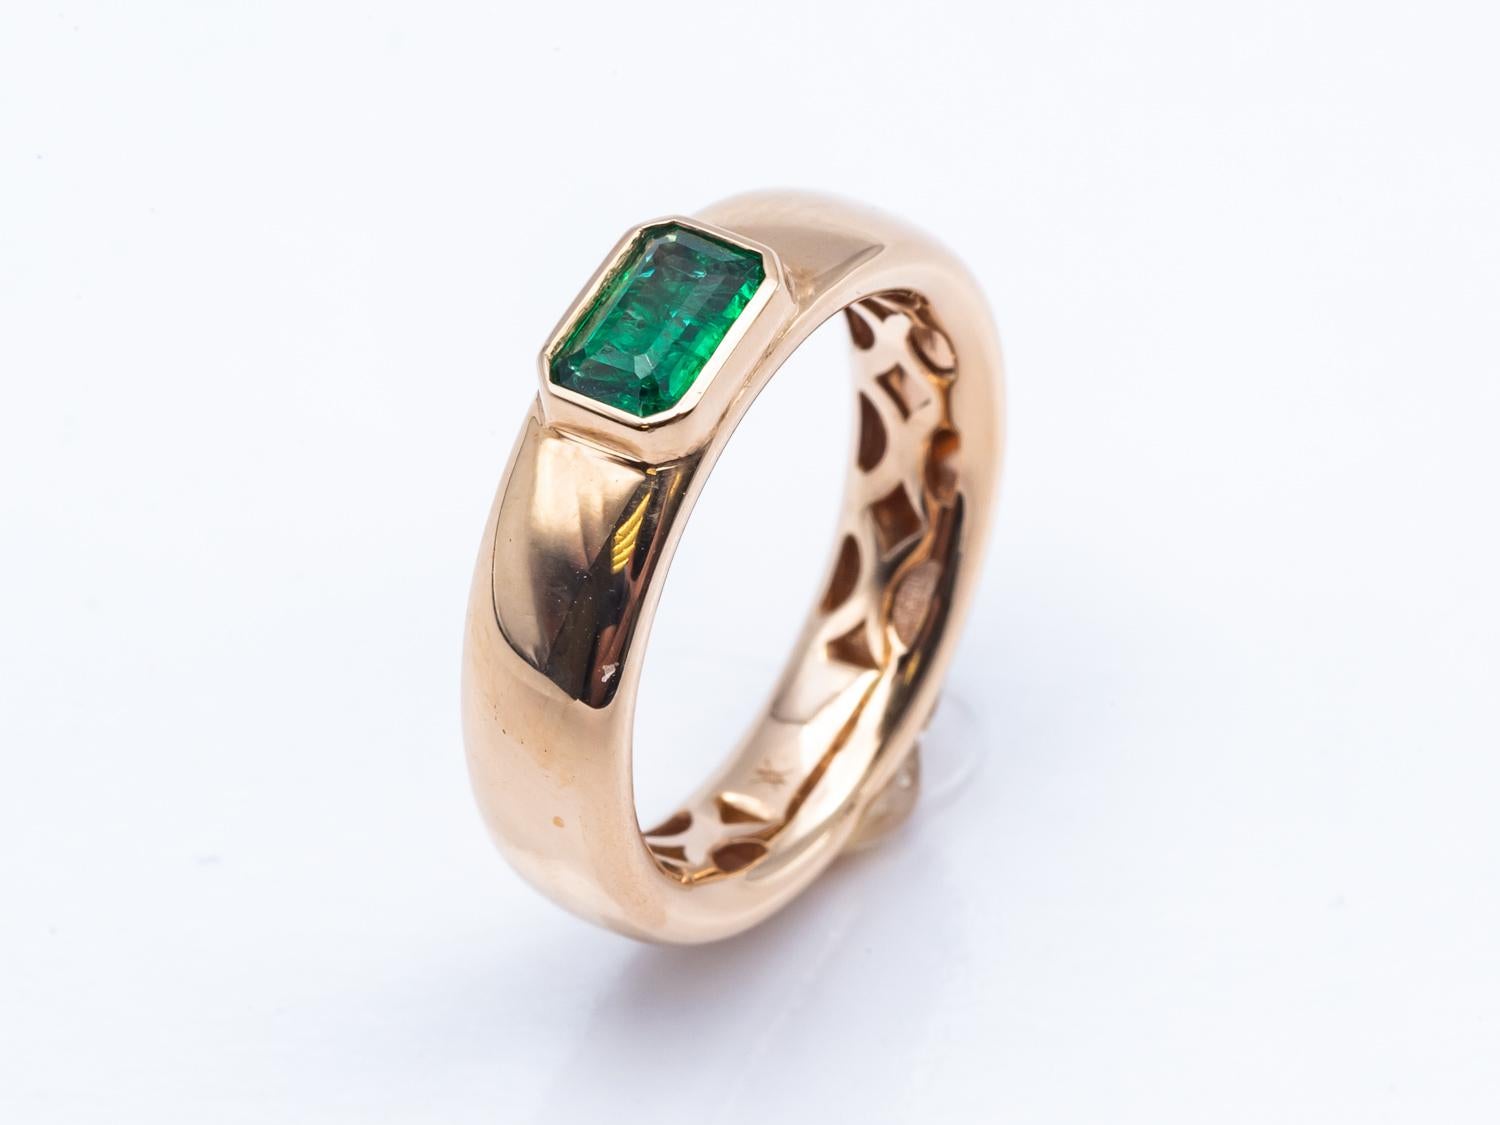 Pink Gold 18 Karats Ring with 0.52 Karats Emerald
This beautiful artisanal emerald ring is made in our workshop with a natural fresh emerald of intense green.
French Size 53
US Size 7 3/4
British Size M/N